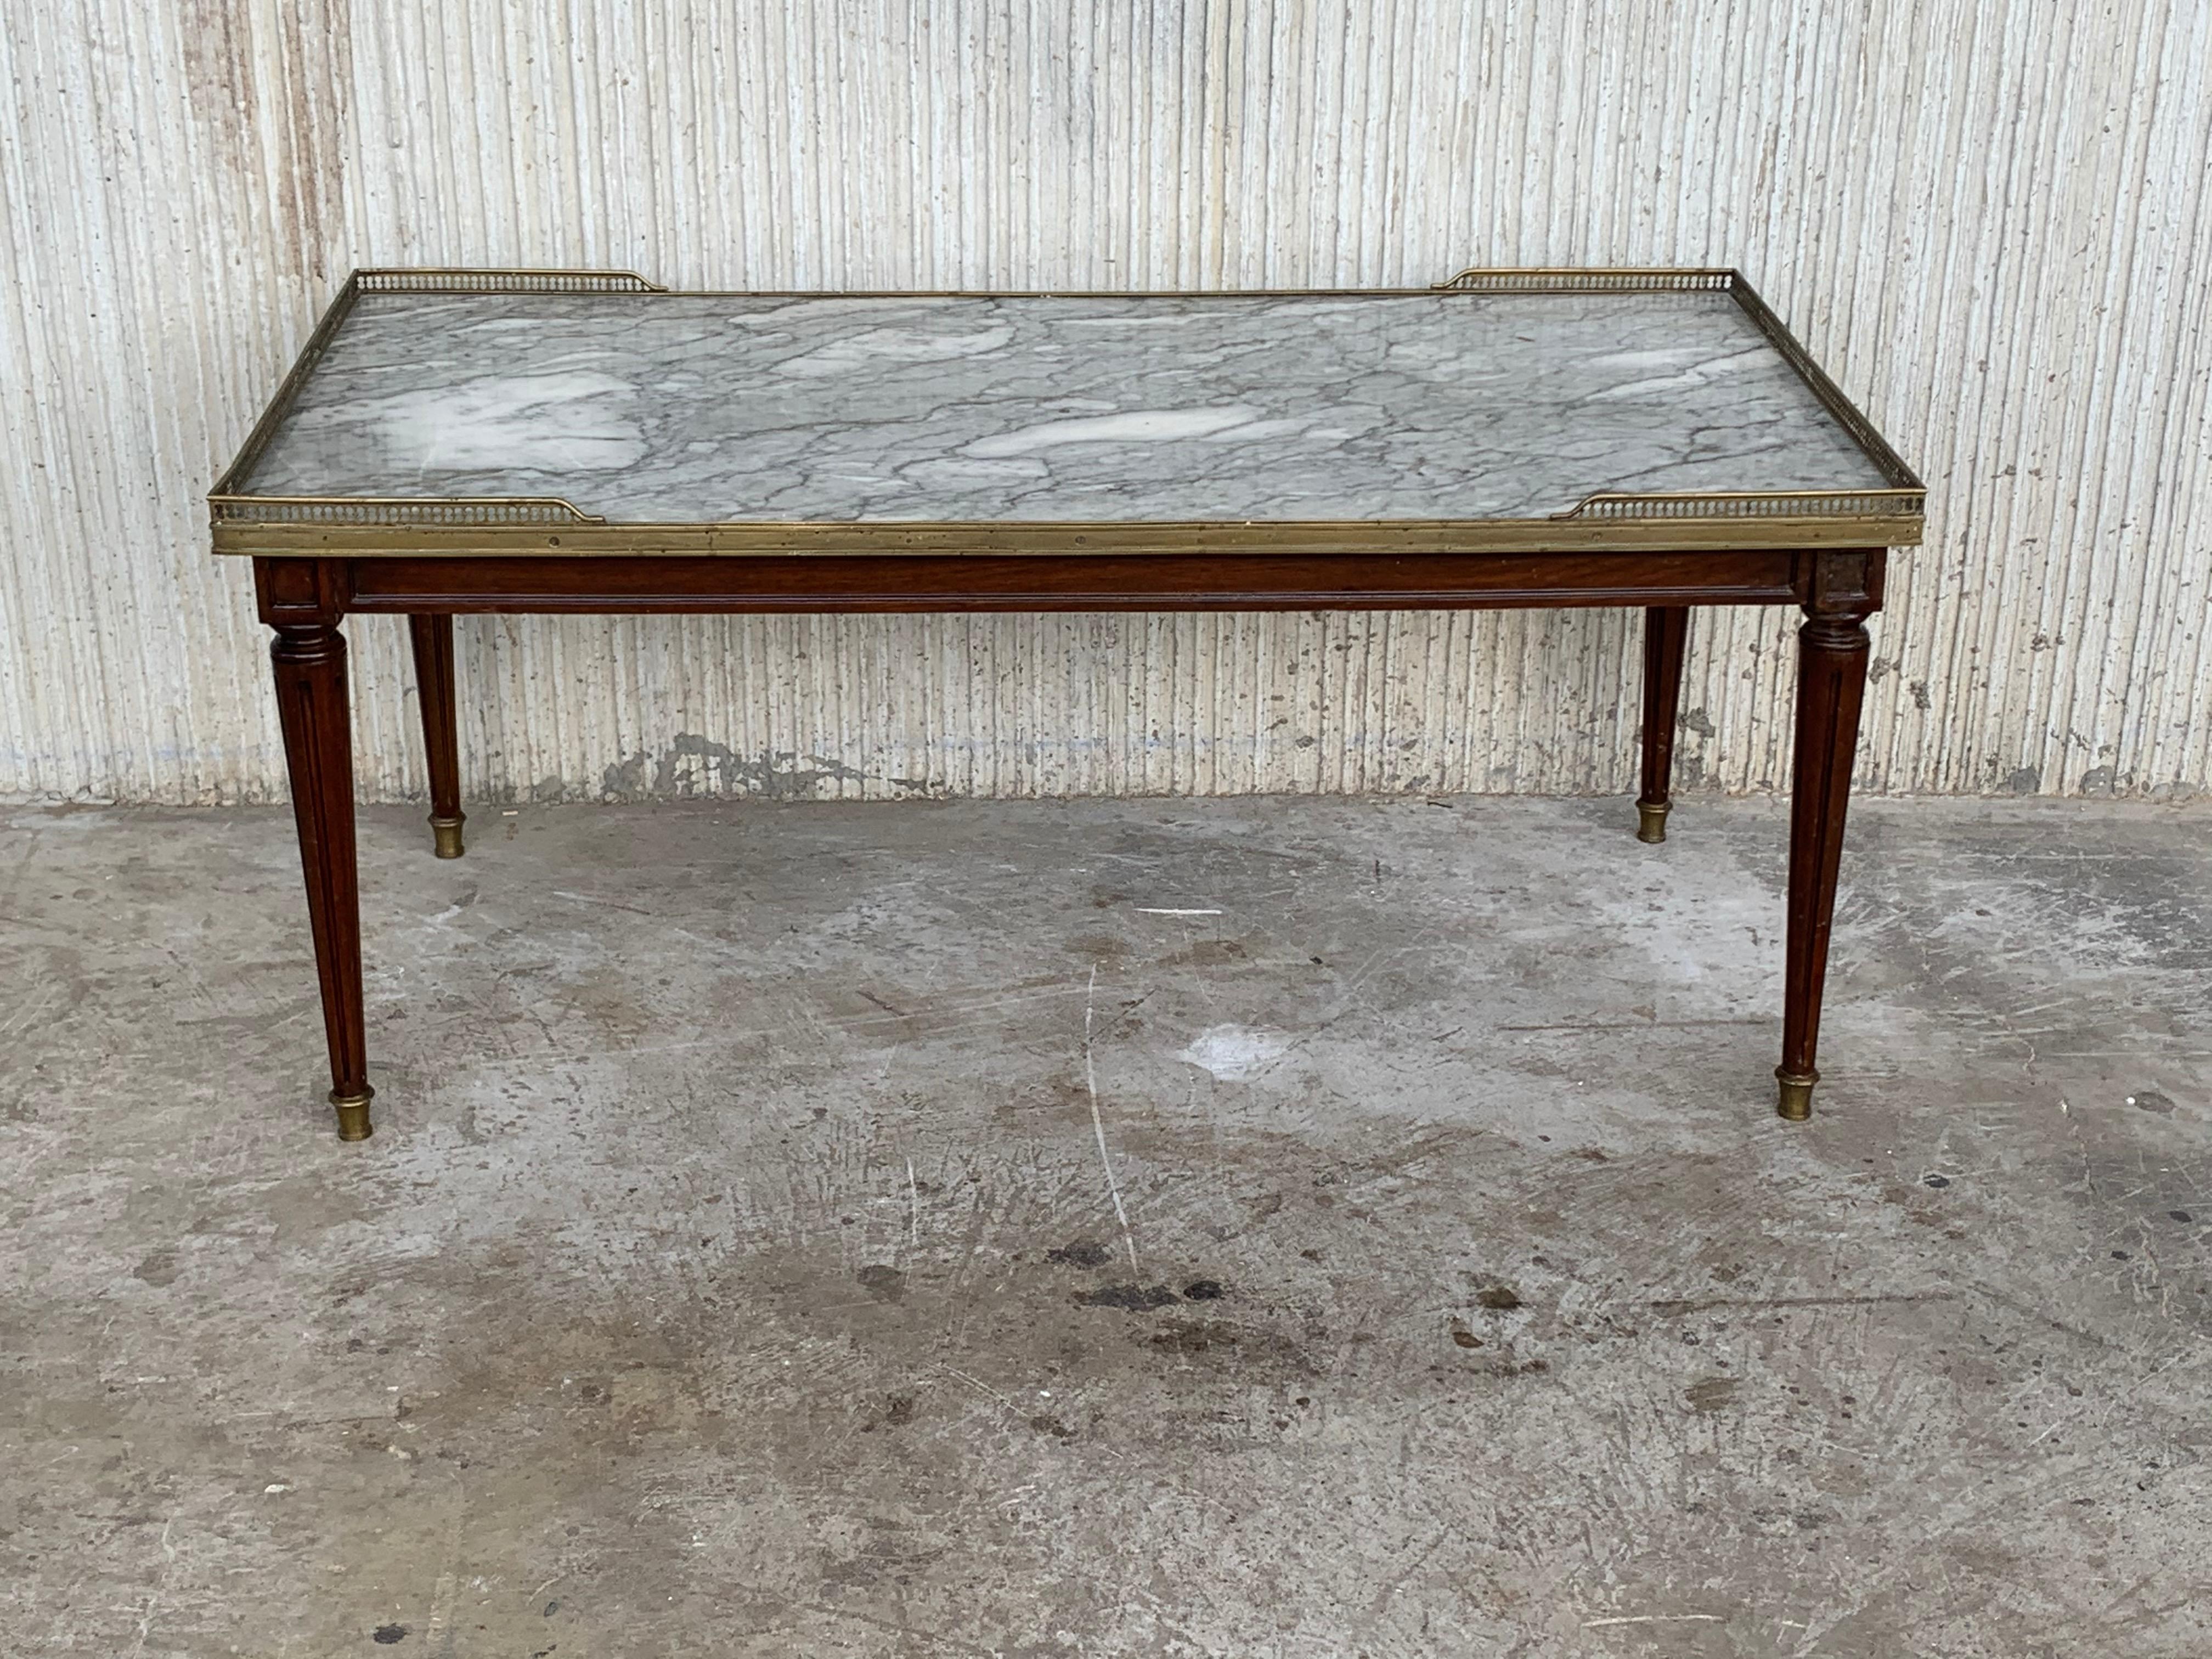 Unusual 19th century rectangular Bouillotte Louis XVI style table guéridon with fluted legs and grey and white marble.